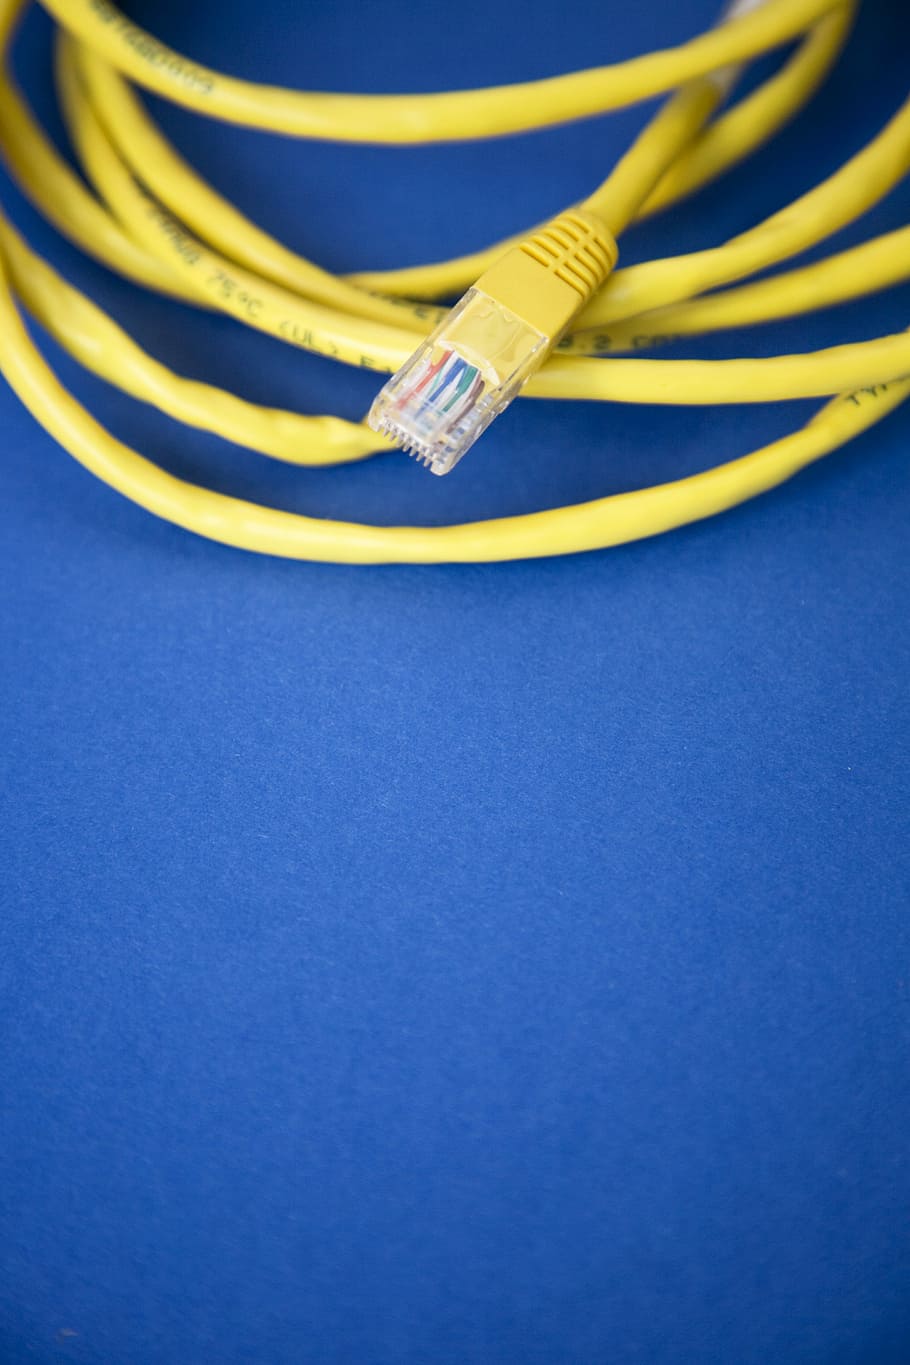 Ethernet cable on blue surface, yellow ethernet cable, tech, wired